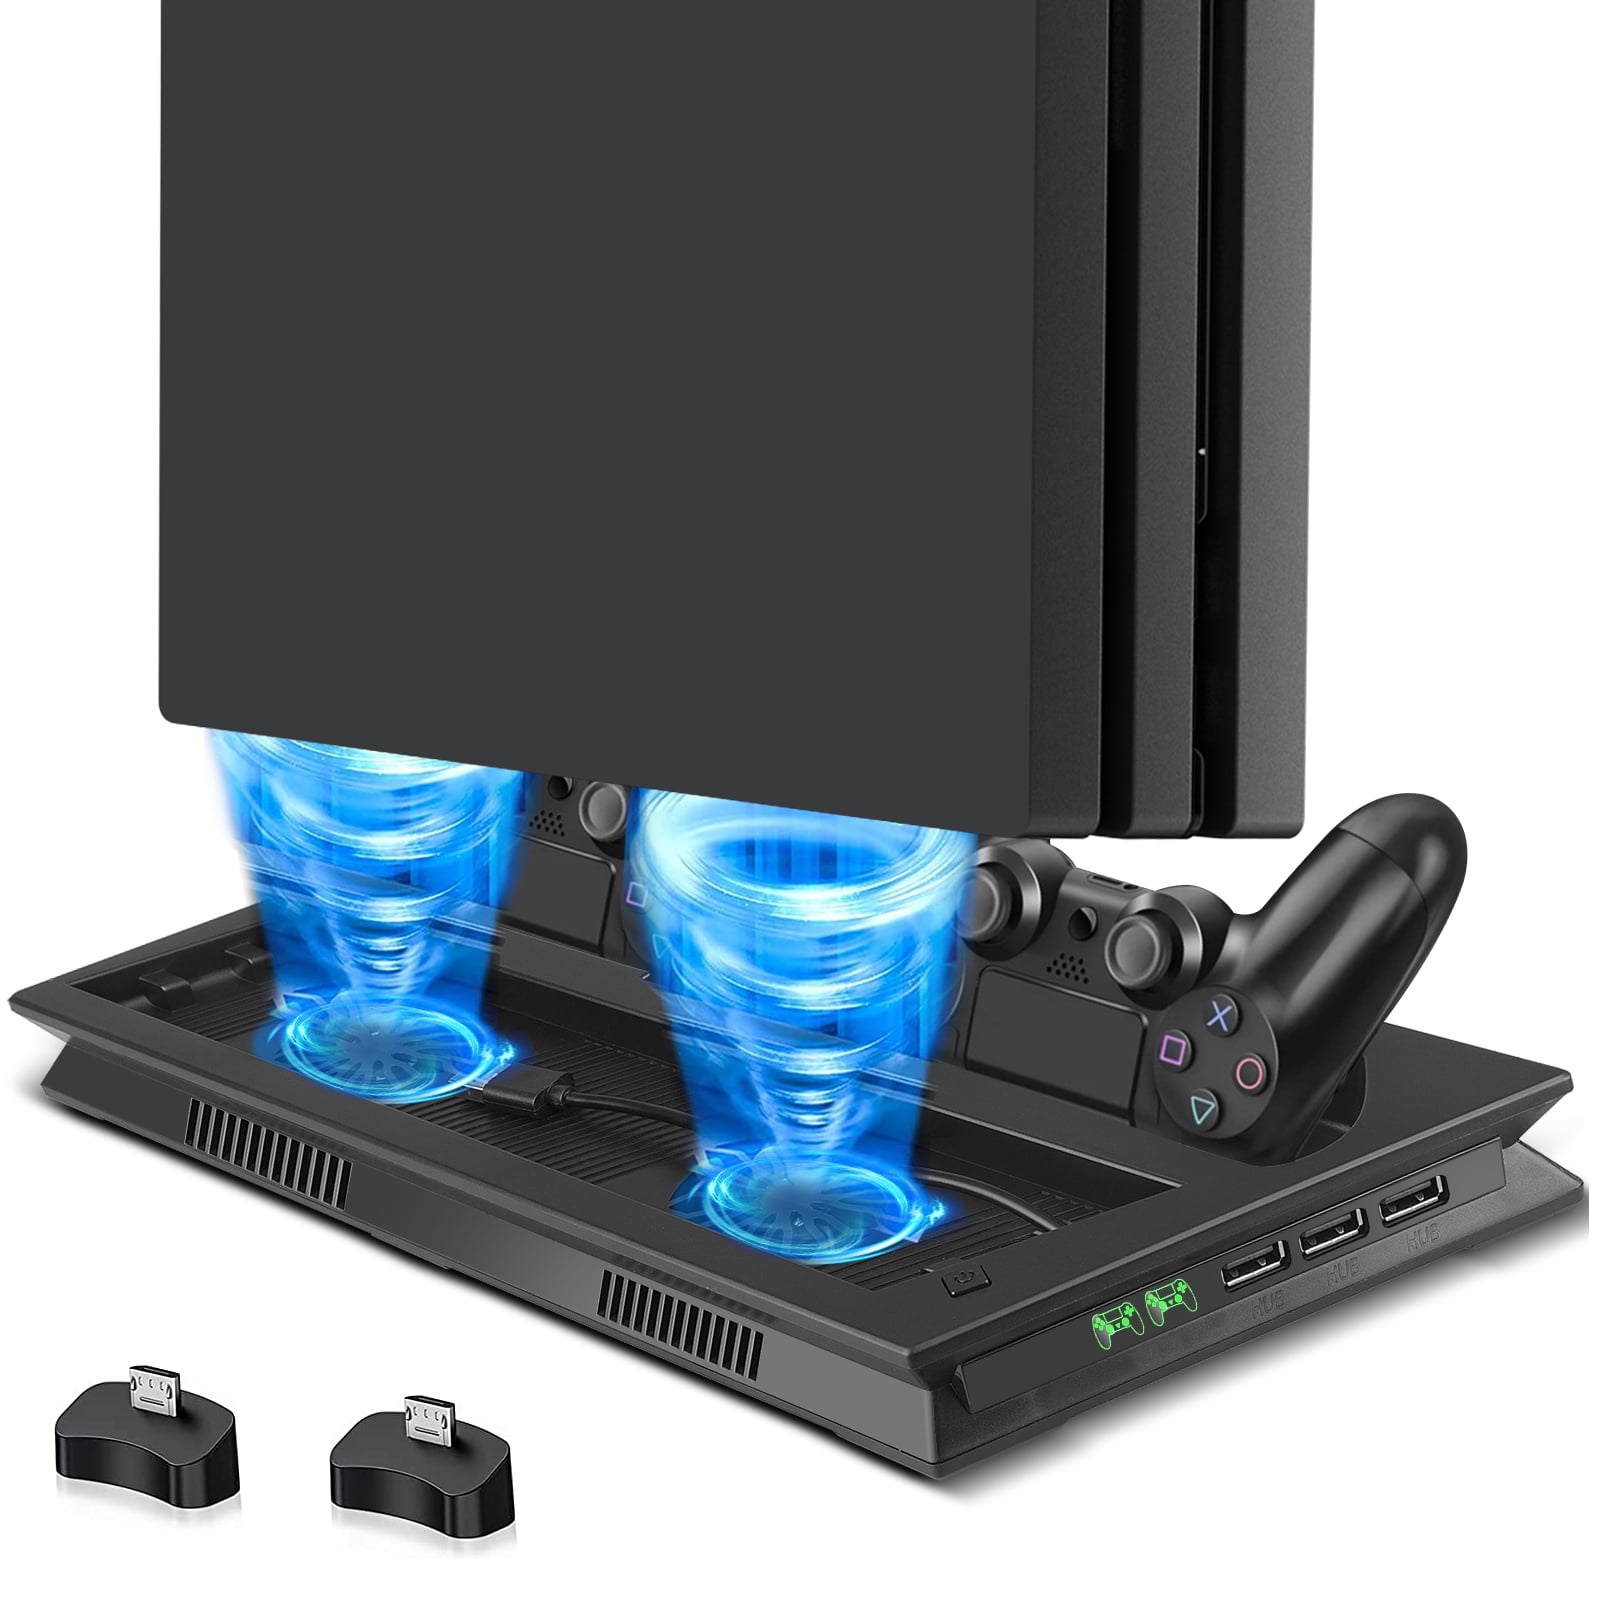 EEEkit Cooling Stand Fit for Sony PS4, PS4 Dual Charging Station for PS4 Dualshock Controllers with 2 Cooling Fans, USB Hub Ports, PS4 Console Accessories, Black - Walmart.com